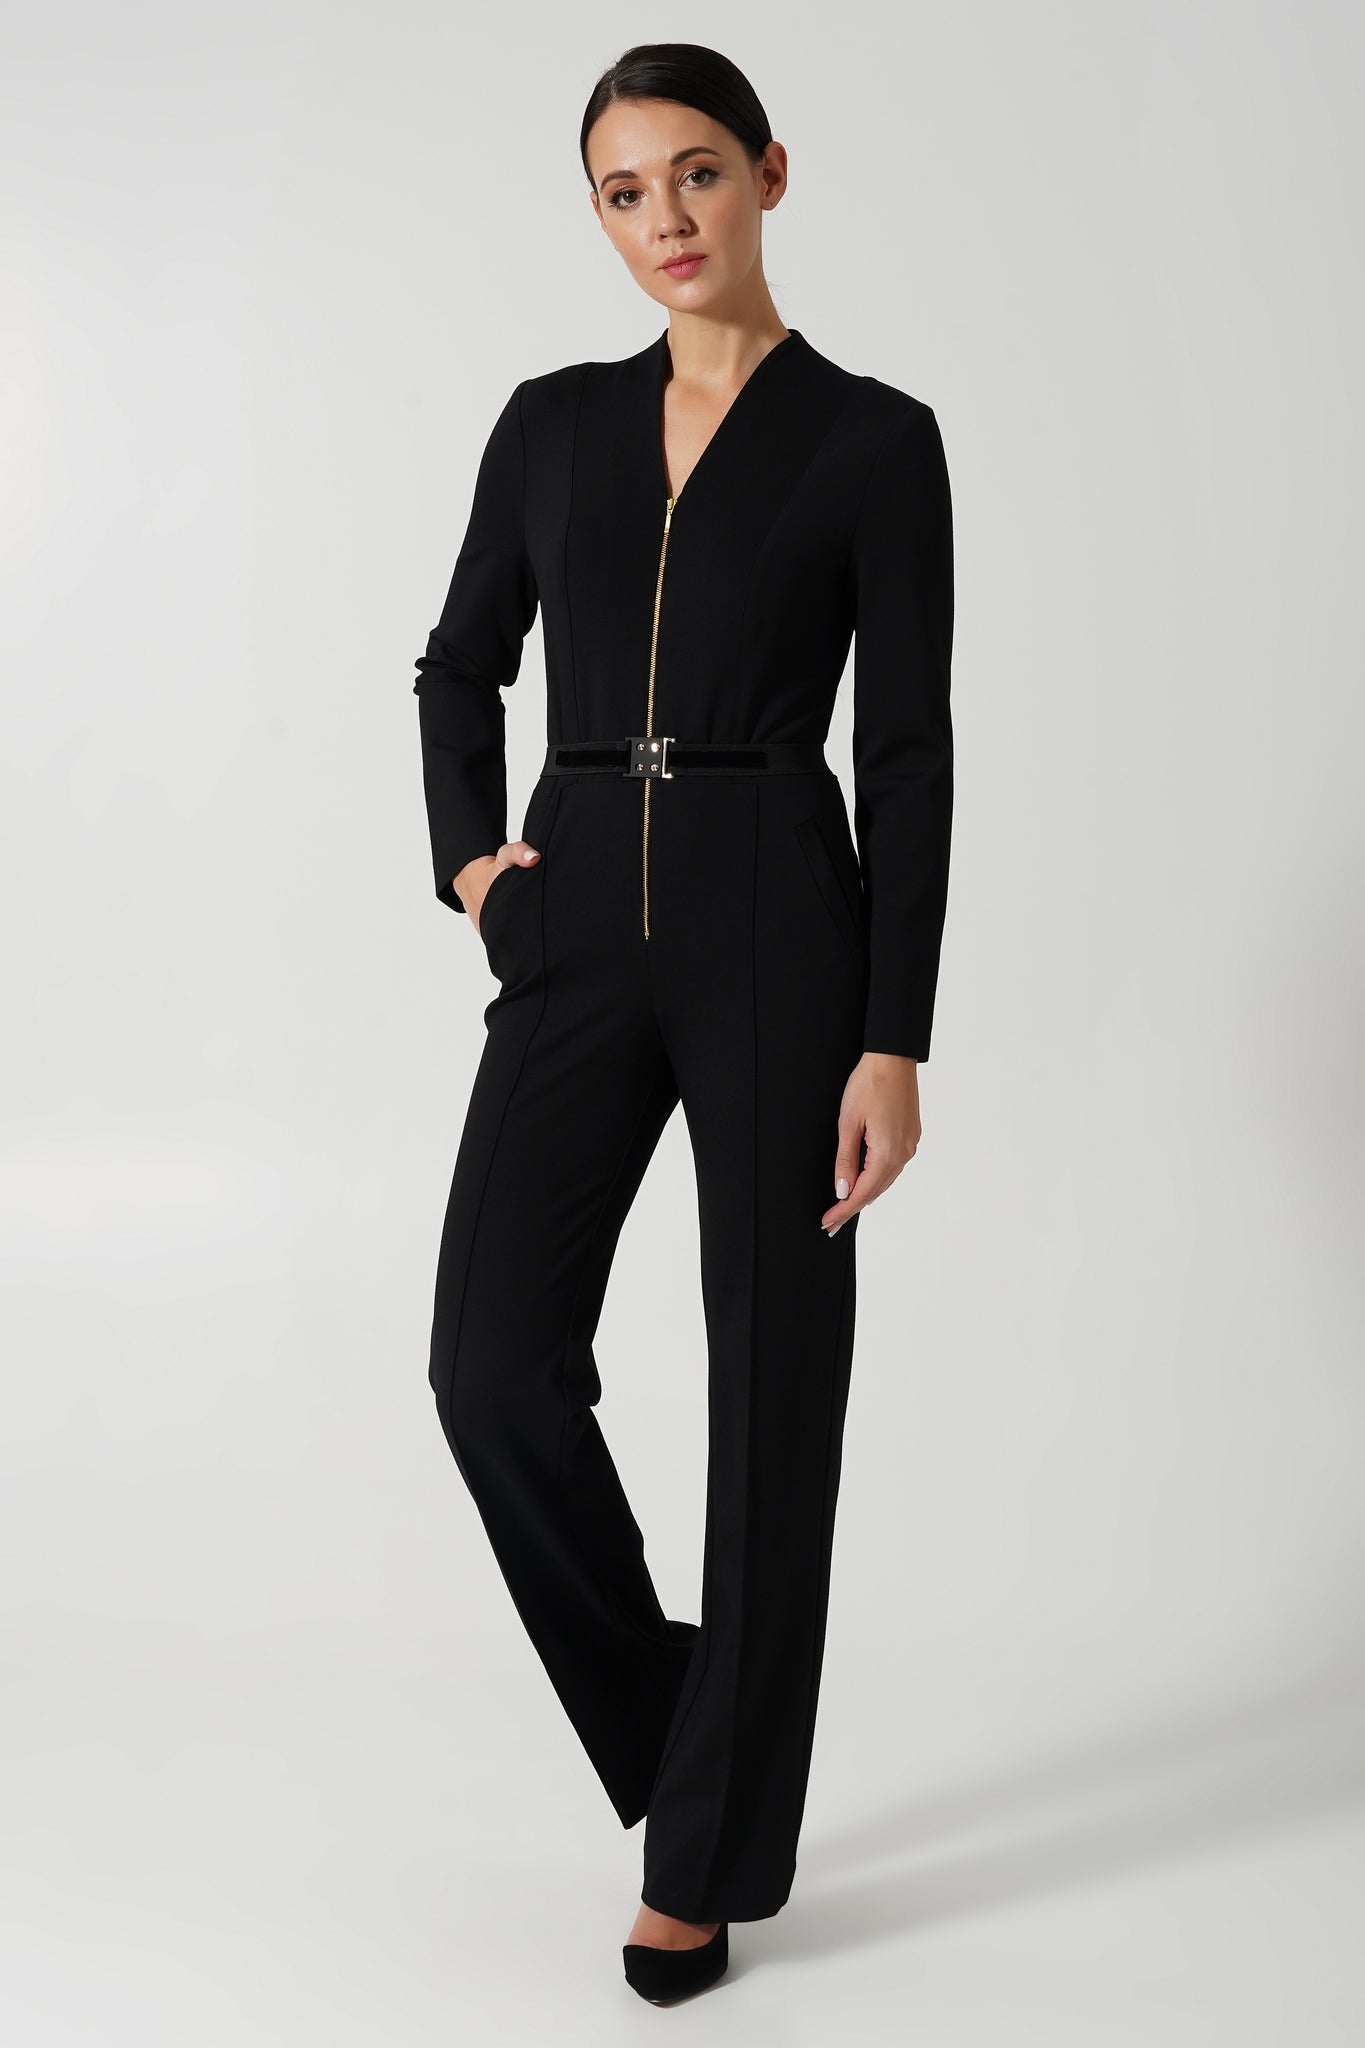 Share more than 139 jumpsuit and blazer outfits best